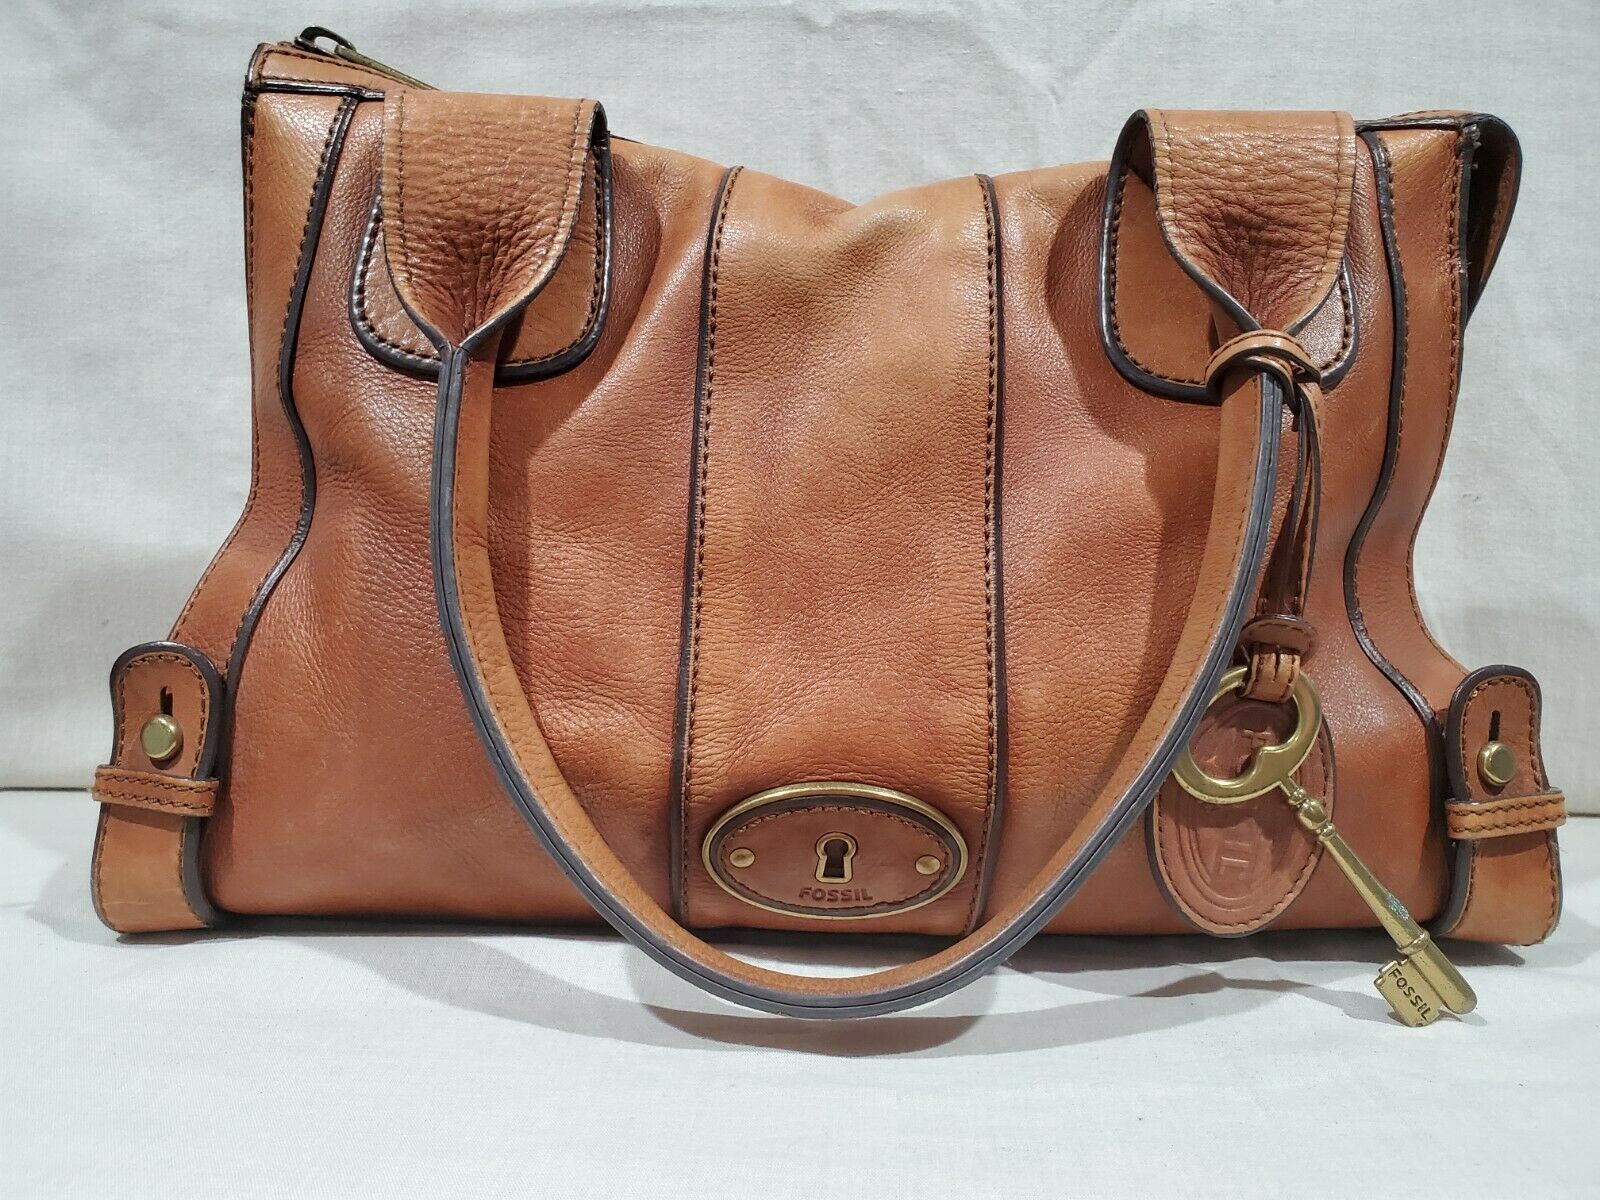 Fossil Bags: Combining Style and Functionality with Fossil